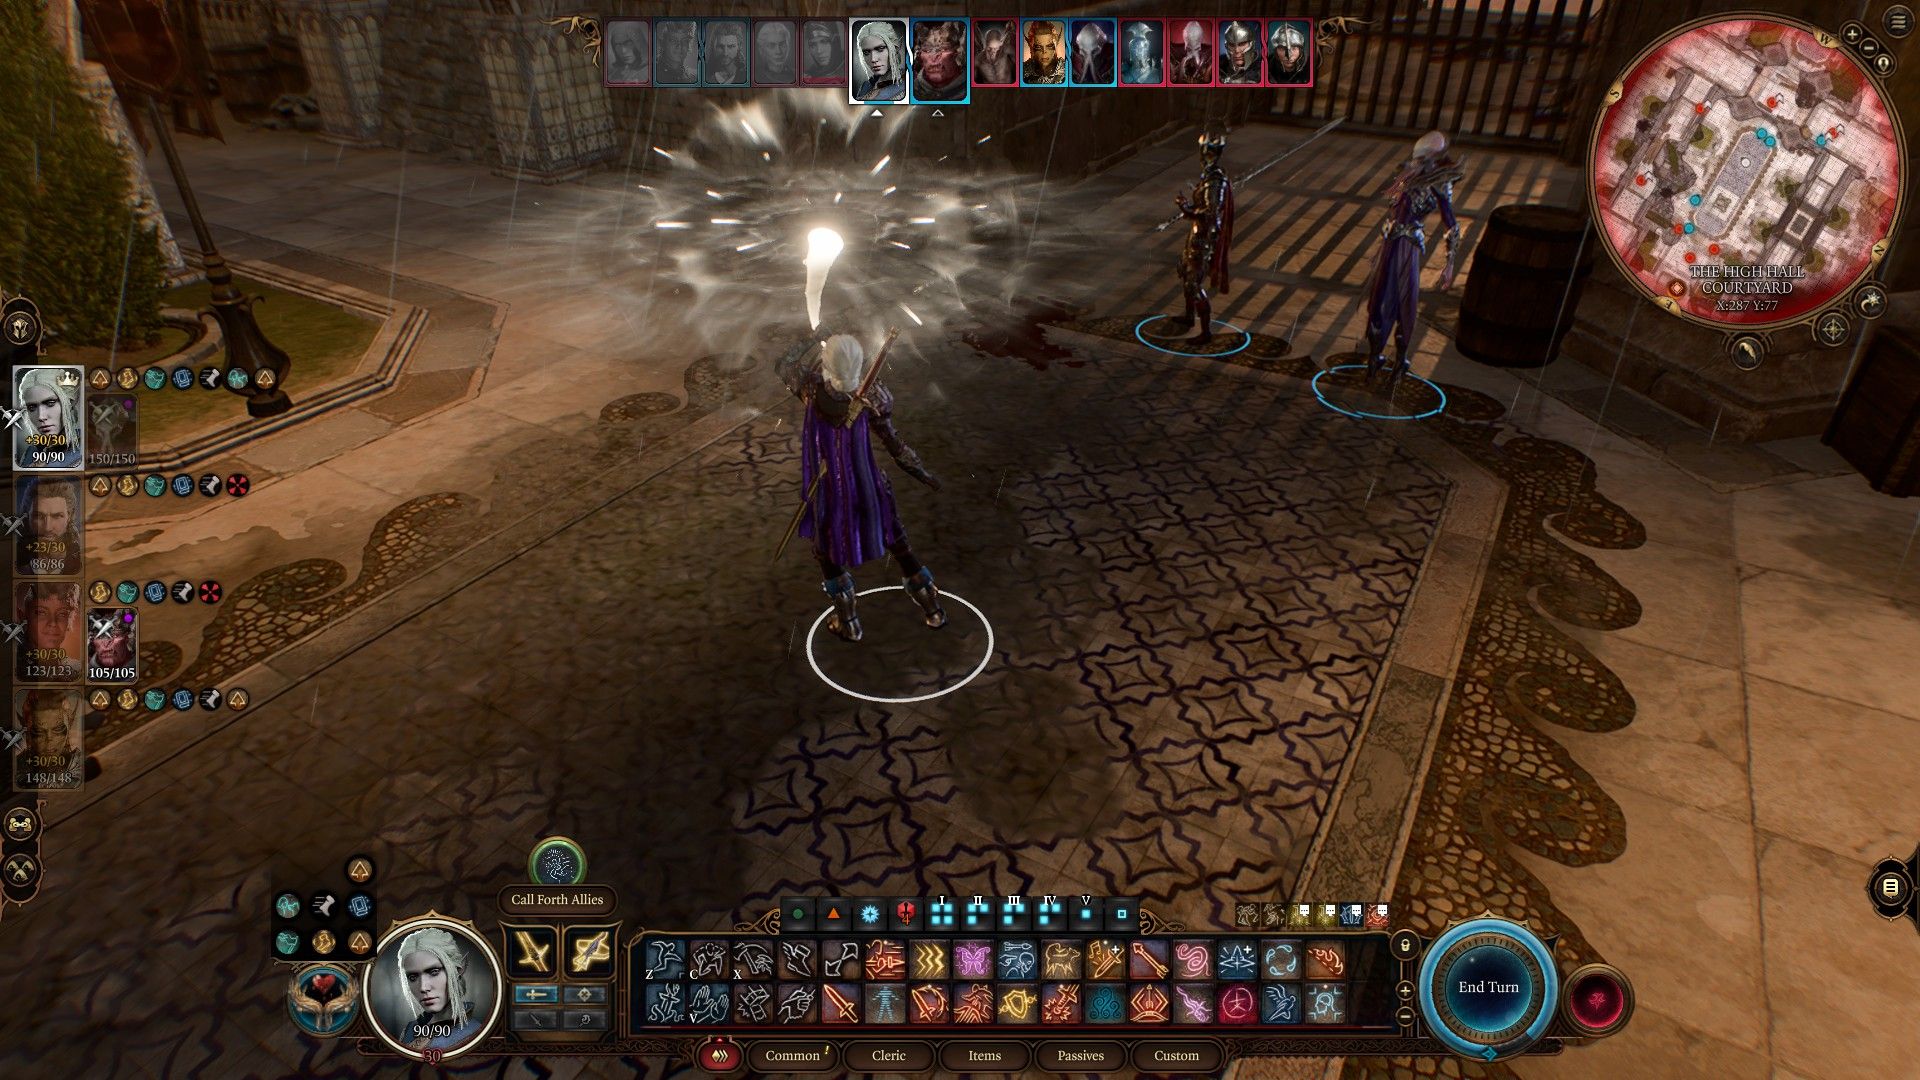 Player Drow Cleric blows horn to call forth allies at High Hall Courtyard in Baldur's Gate 3